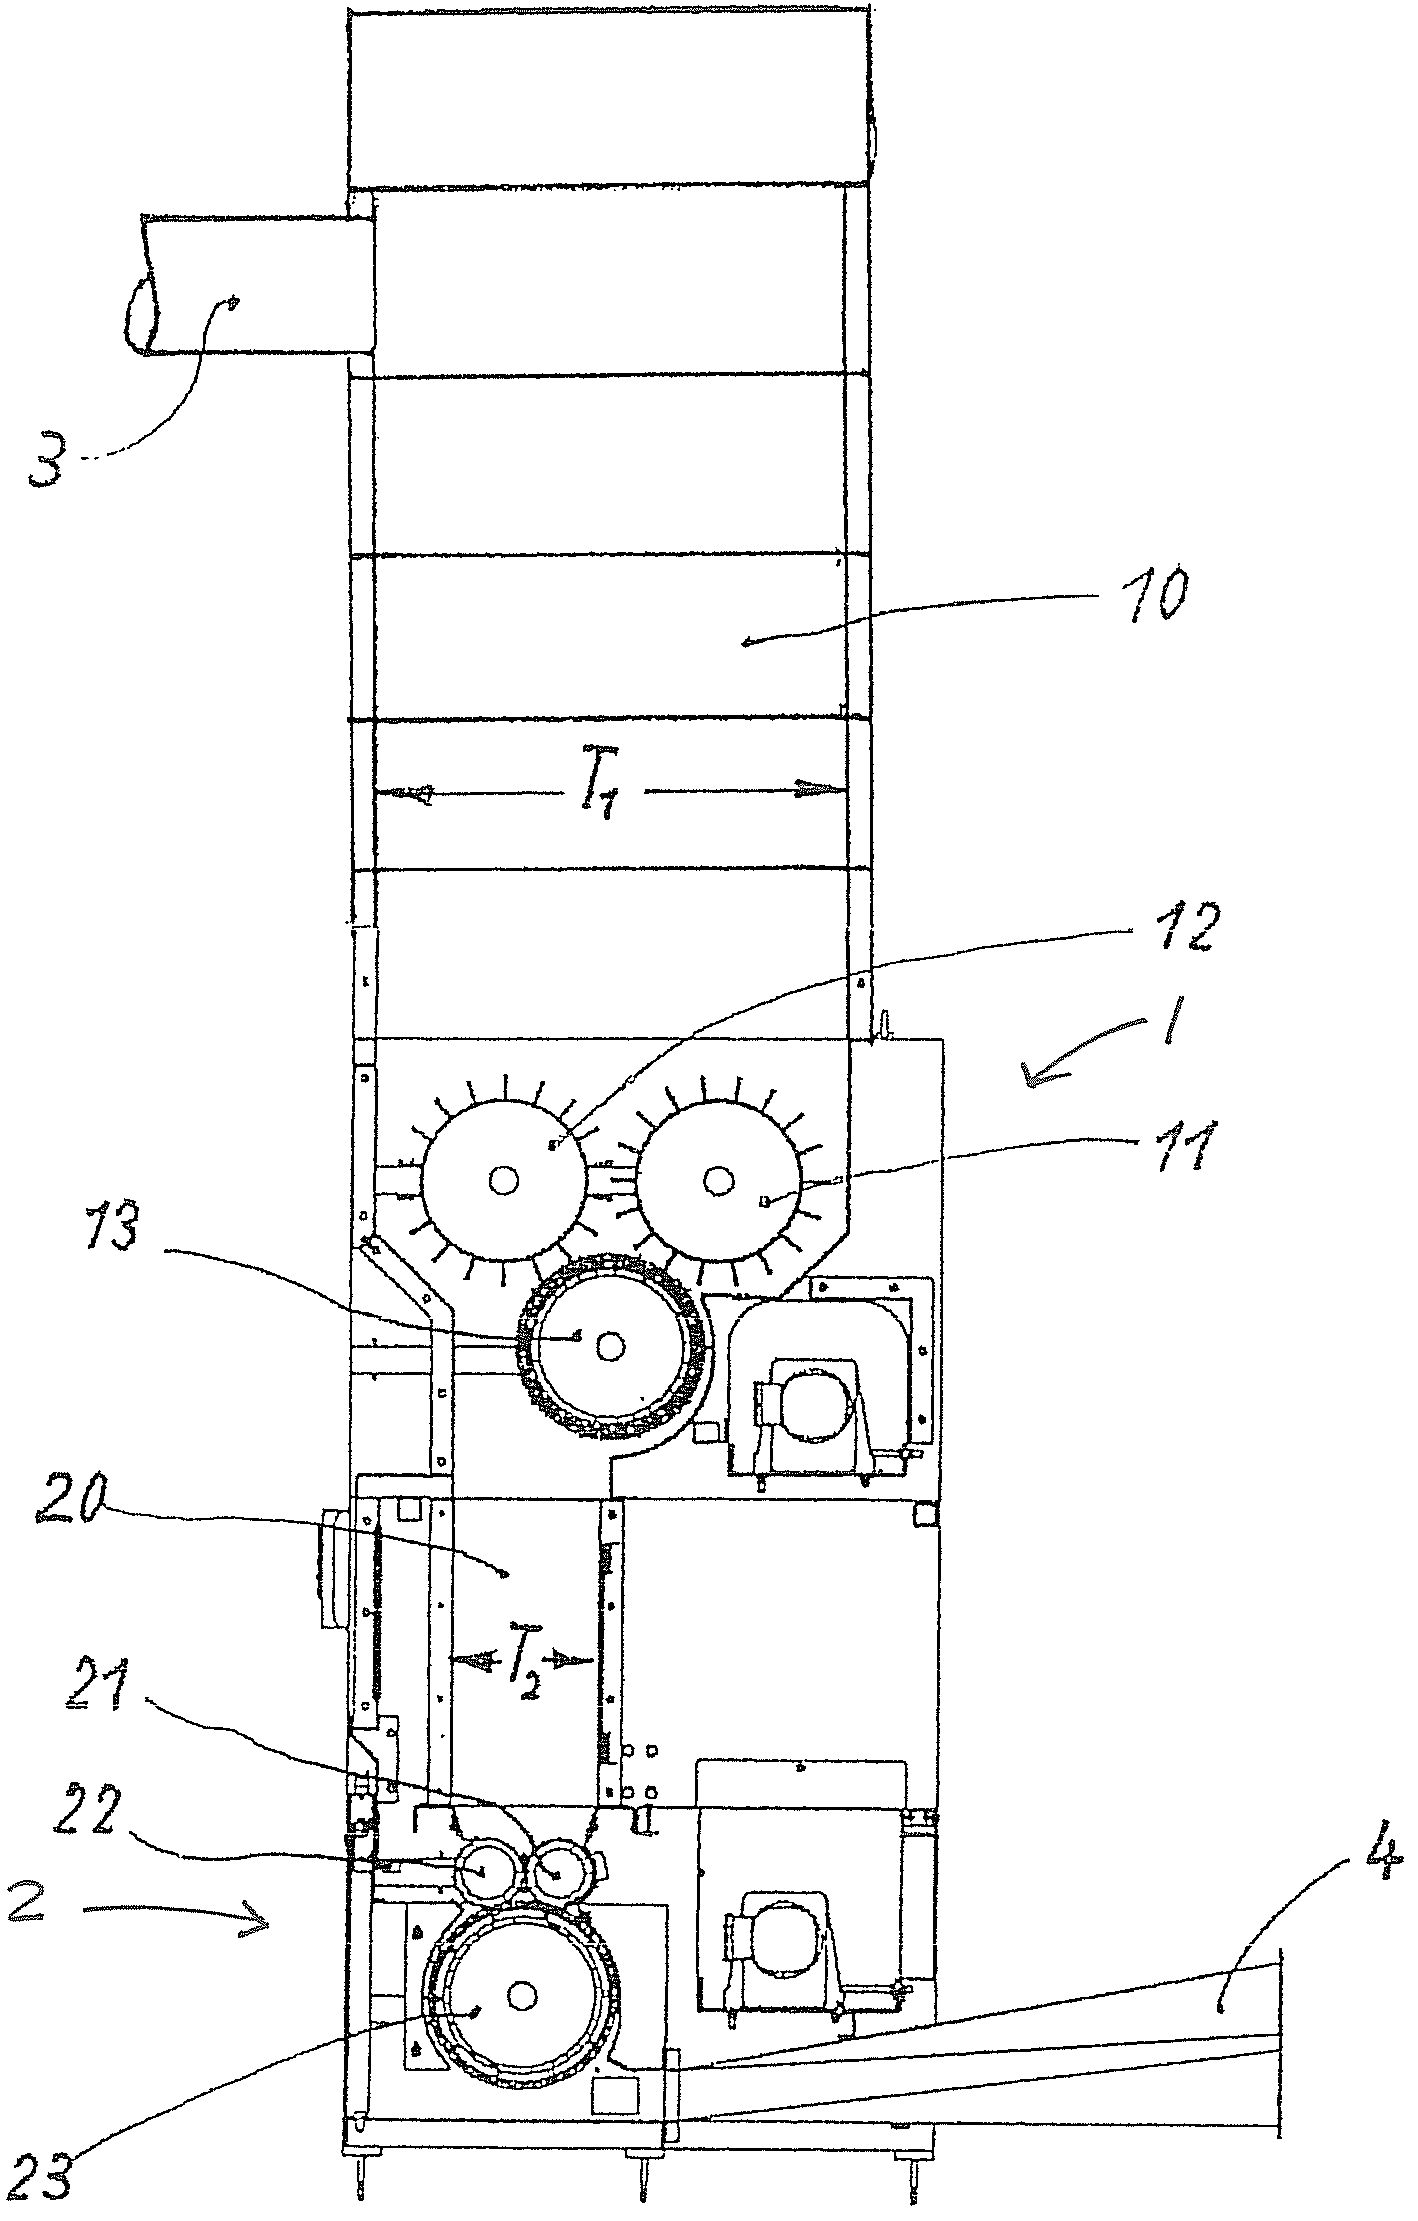 Procedure and system for opening and proportioning synthetic material